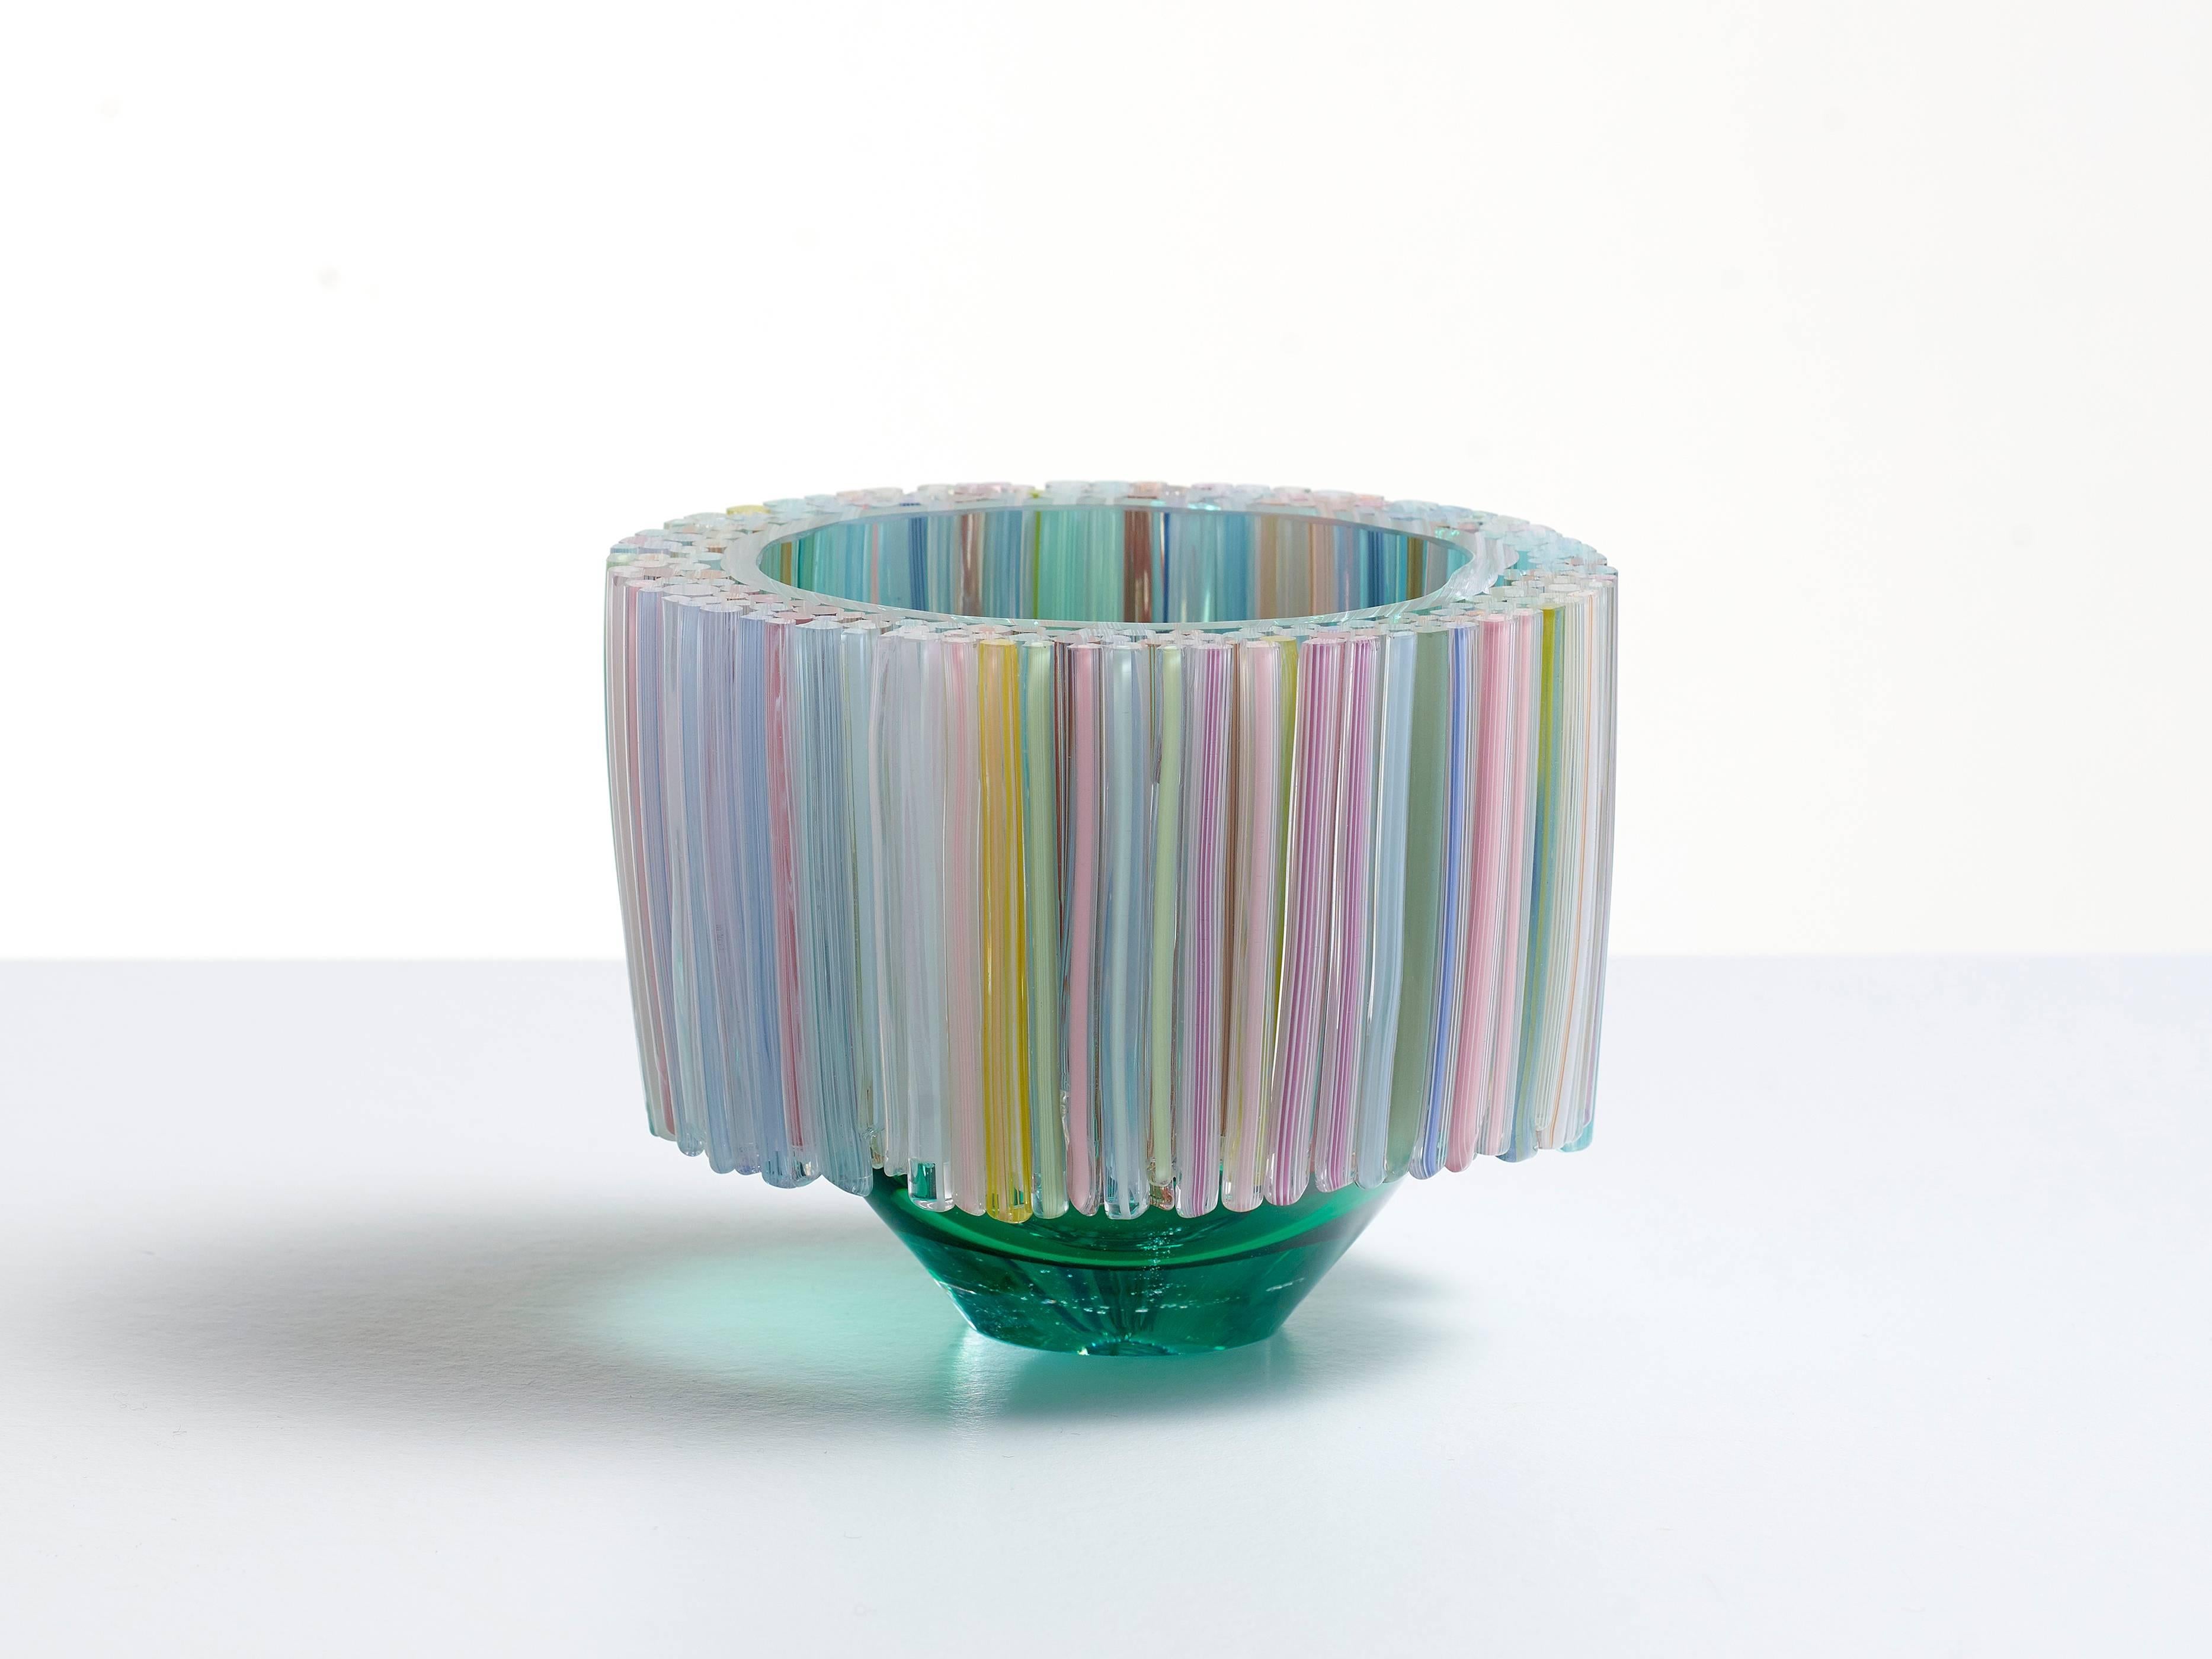 This beautiful blown glass green bowl is decorated with hand crafted glass threads that are melted to the body of the glass vessel. The many colors of the threads like, green, pink, purple, yellow and white are stylishly combined, resulting in a